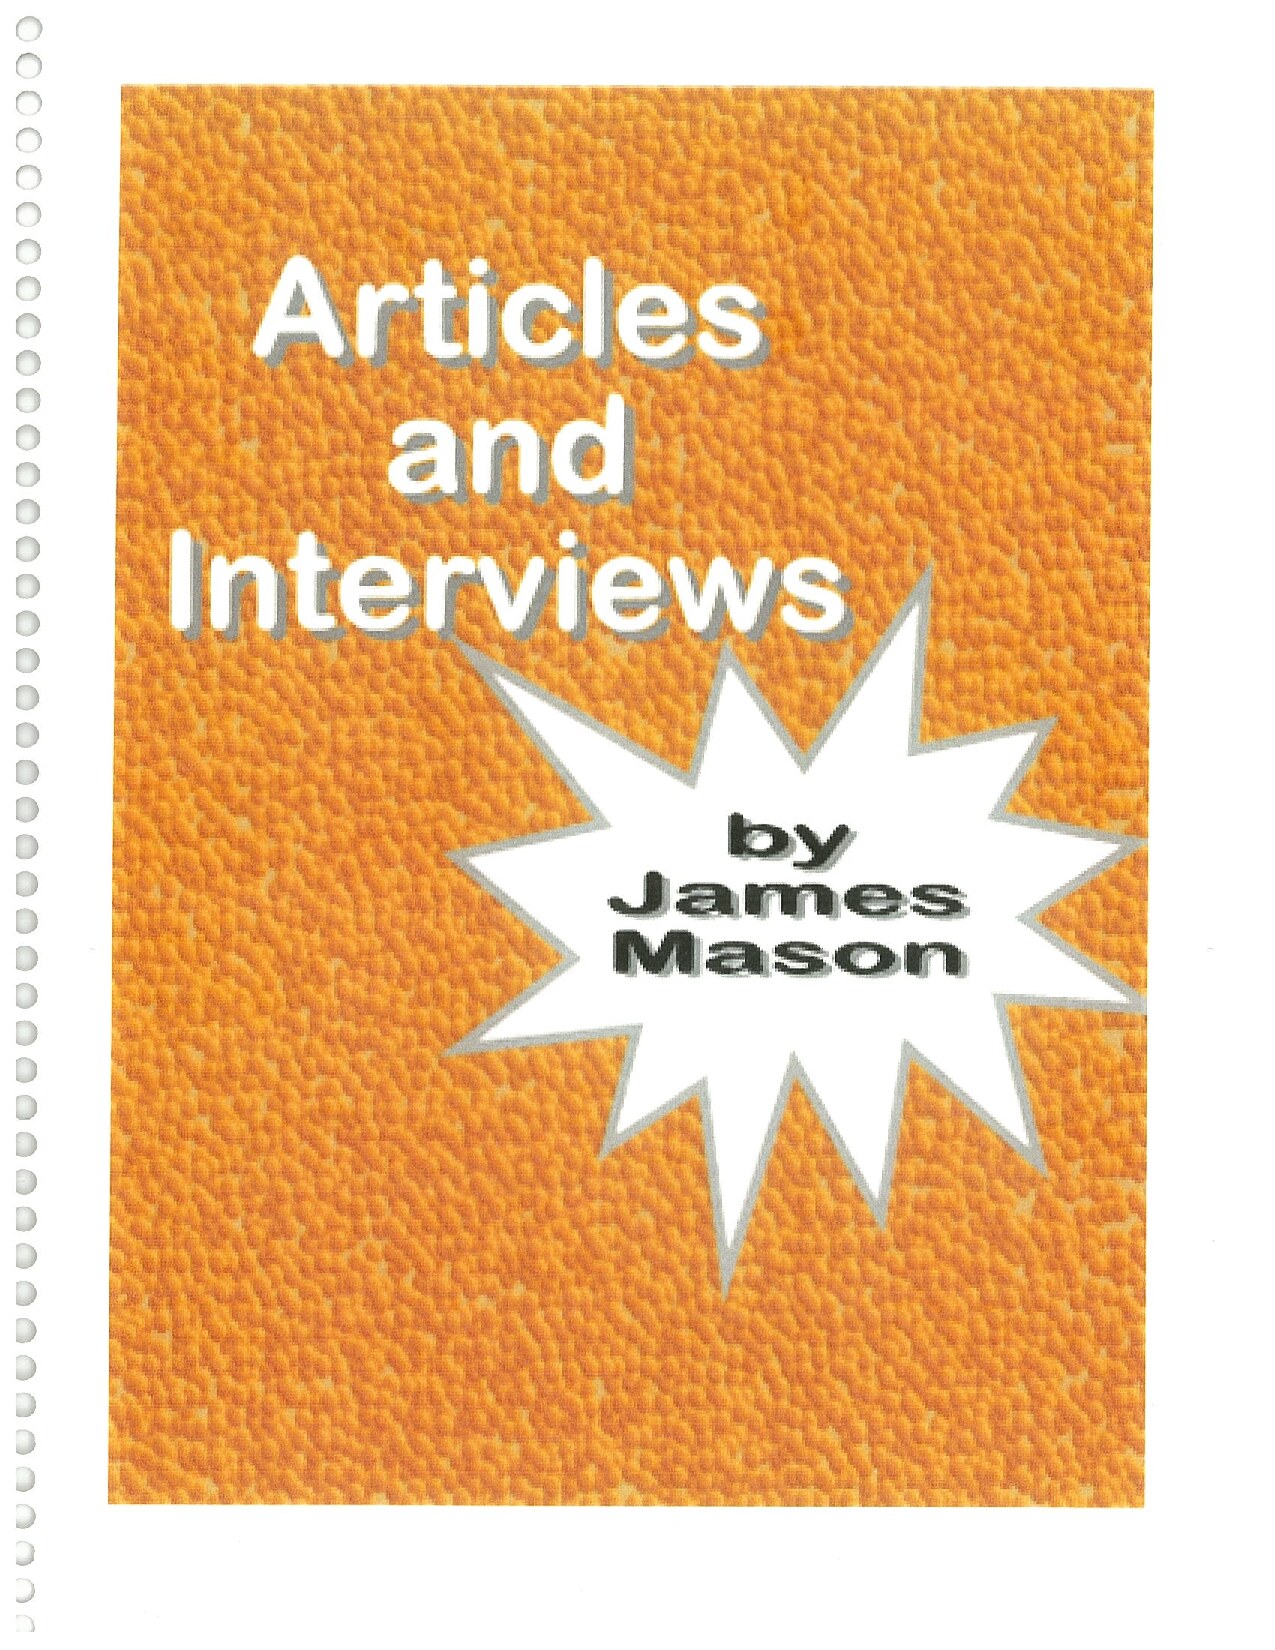 Articles and Interviews by James Mason